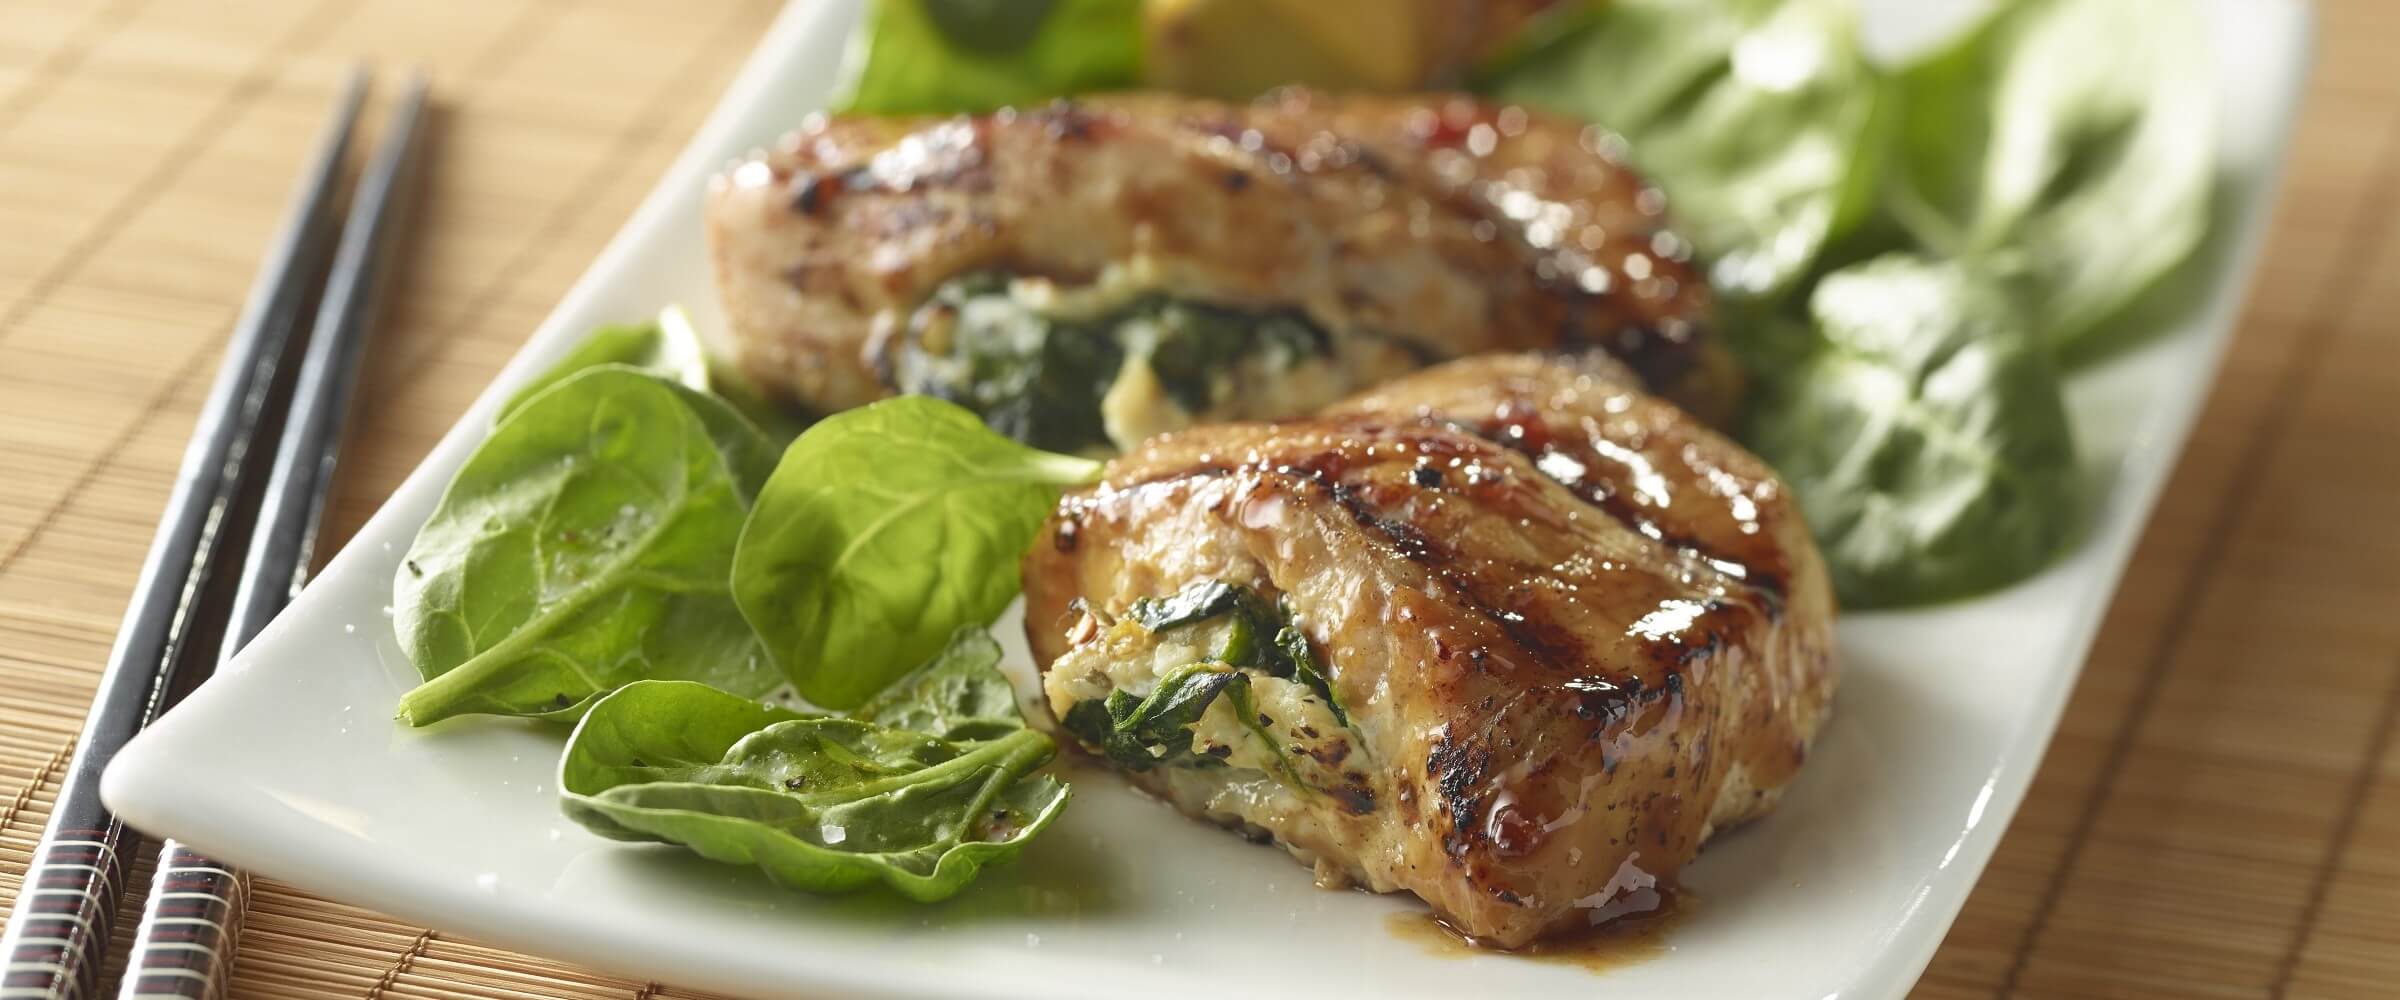 stuffed spicy pork chops on white plate with spinach and chopsticks